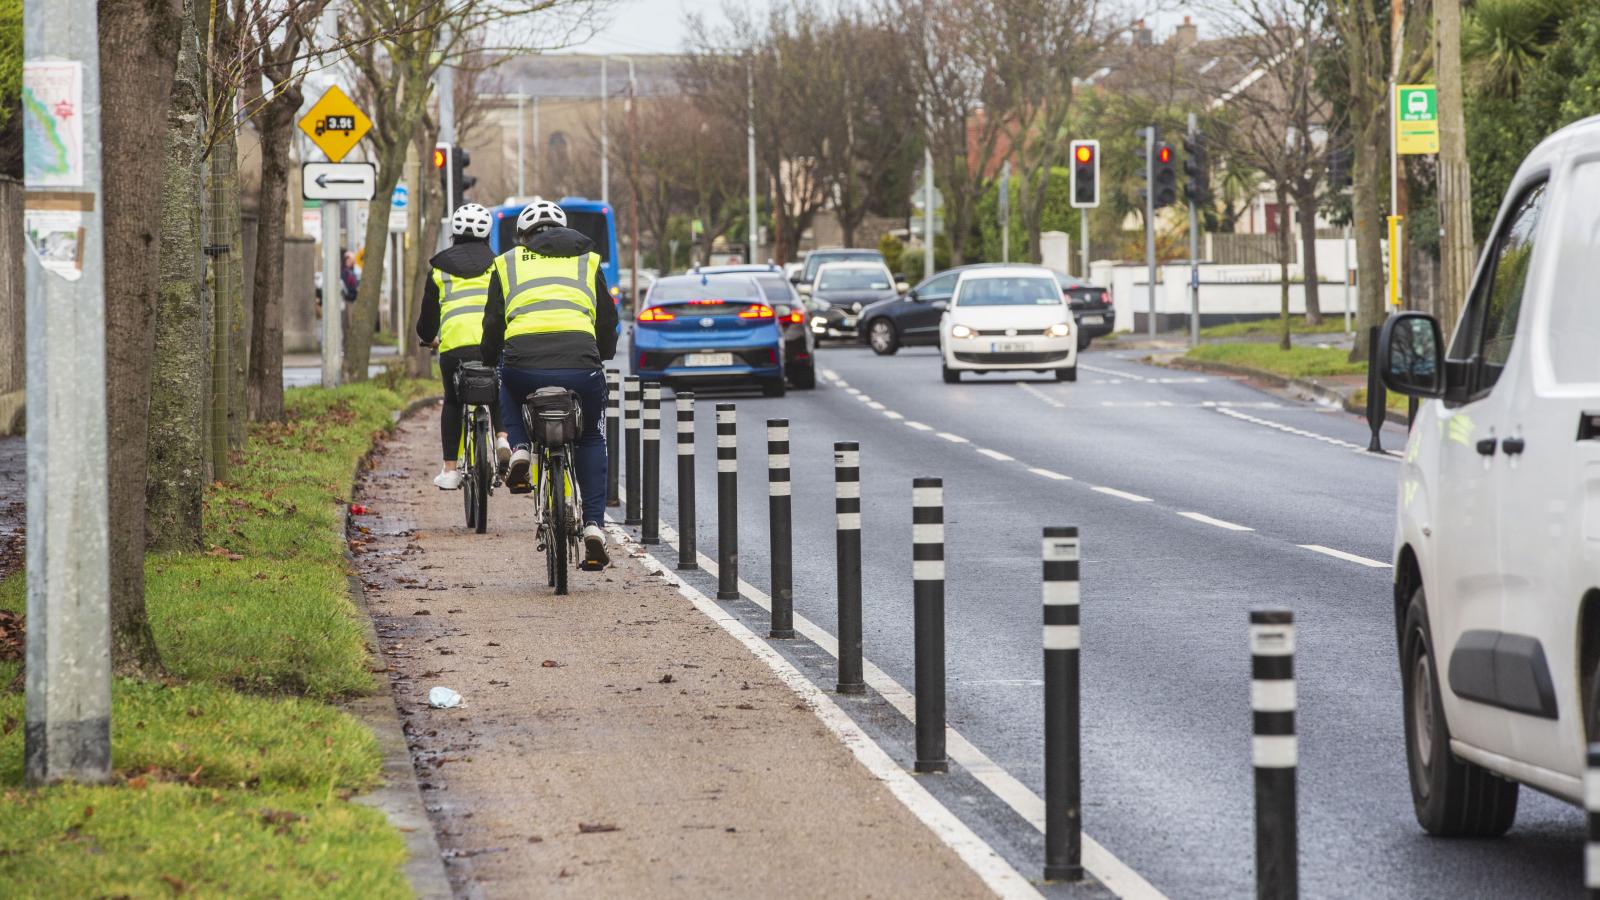 Protected Cycle Lane in use